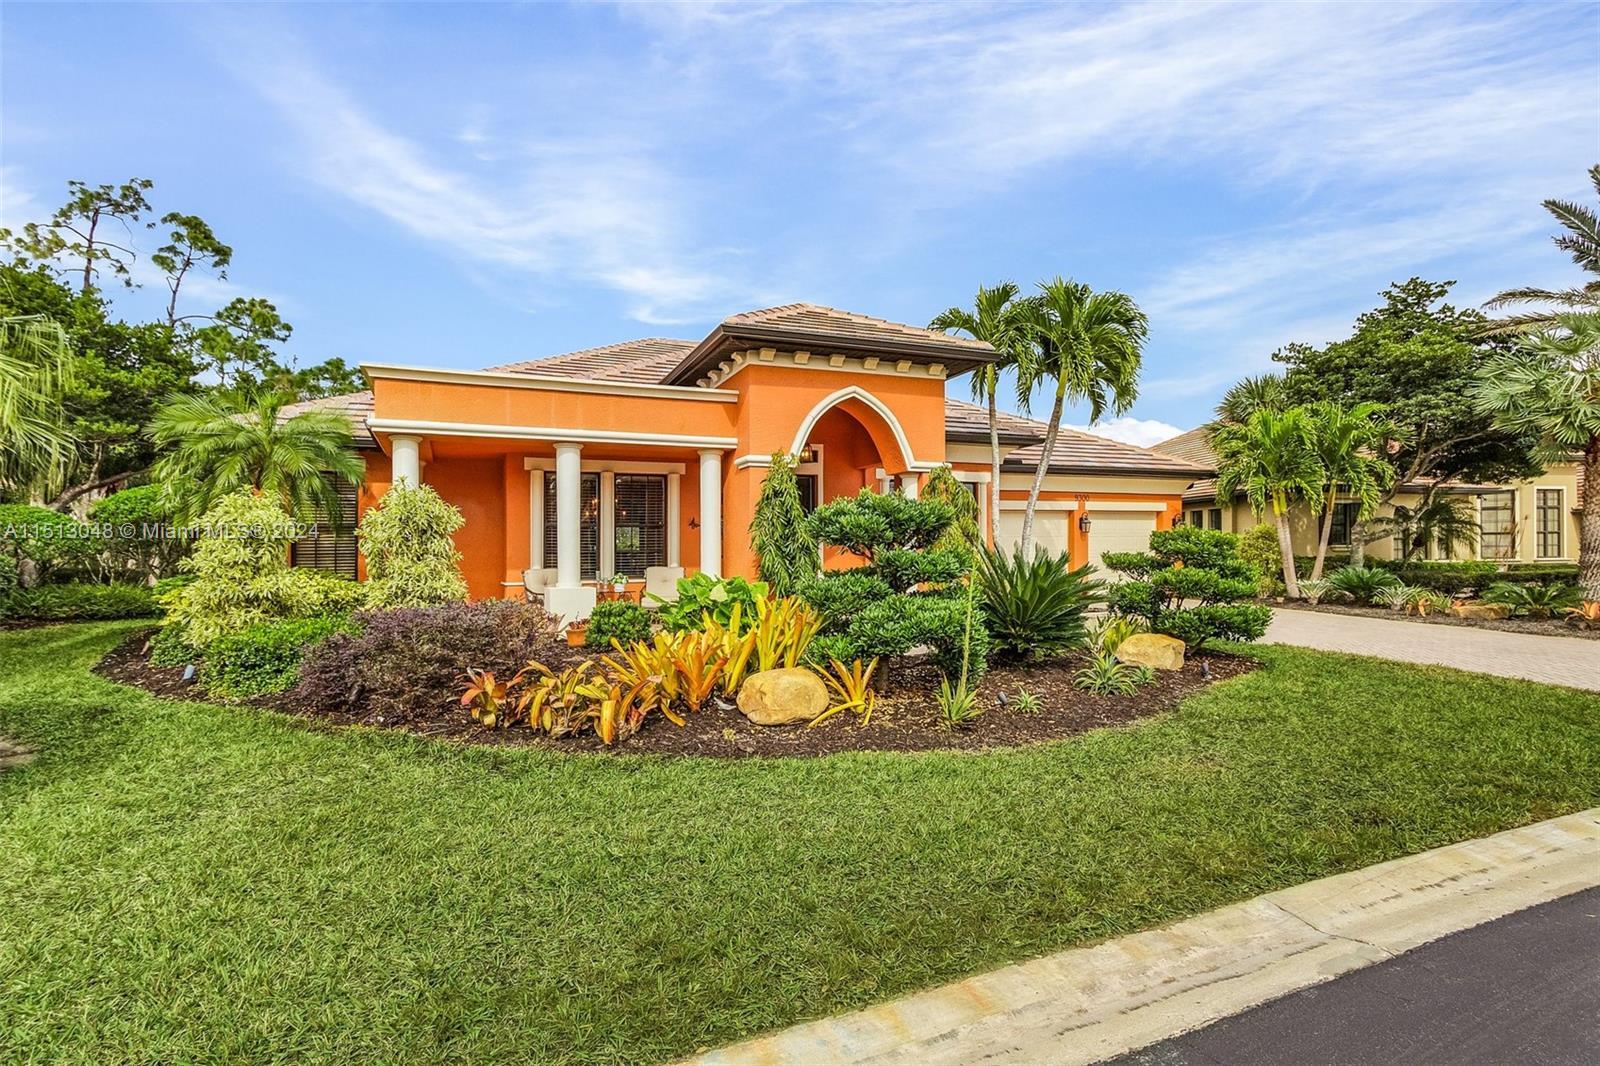 Photo of 9300 Trieste in Fort Myers, FL